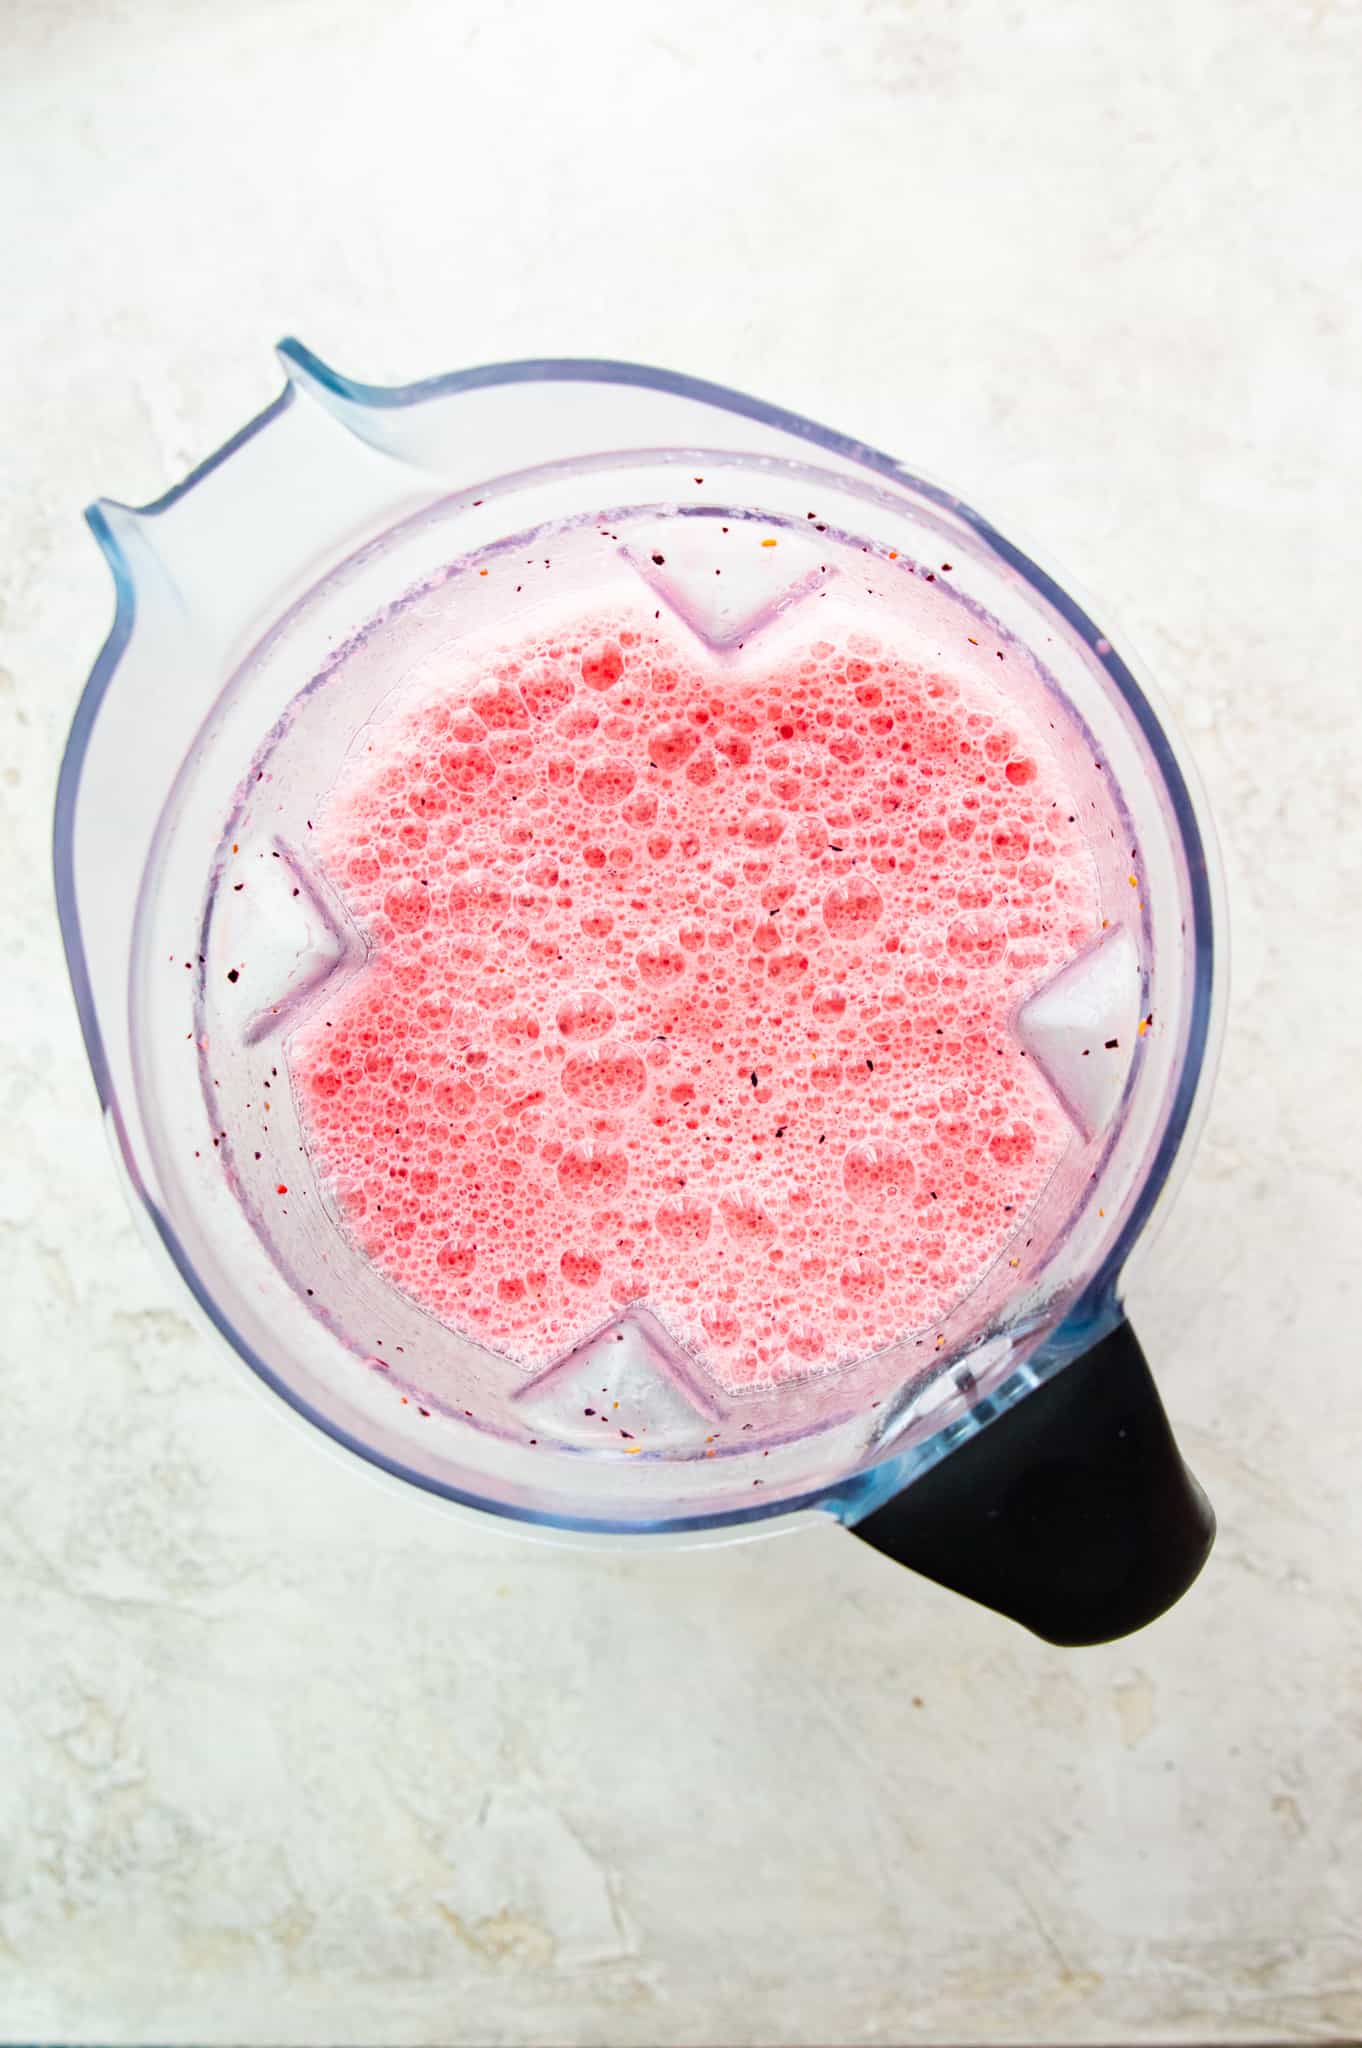 A blender full of a pink smoothie.